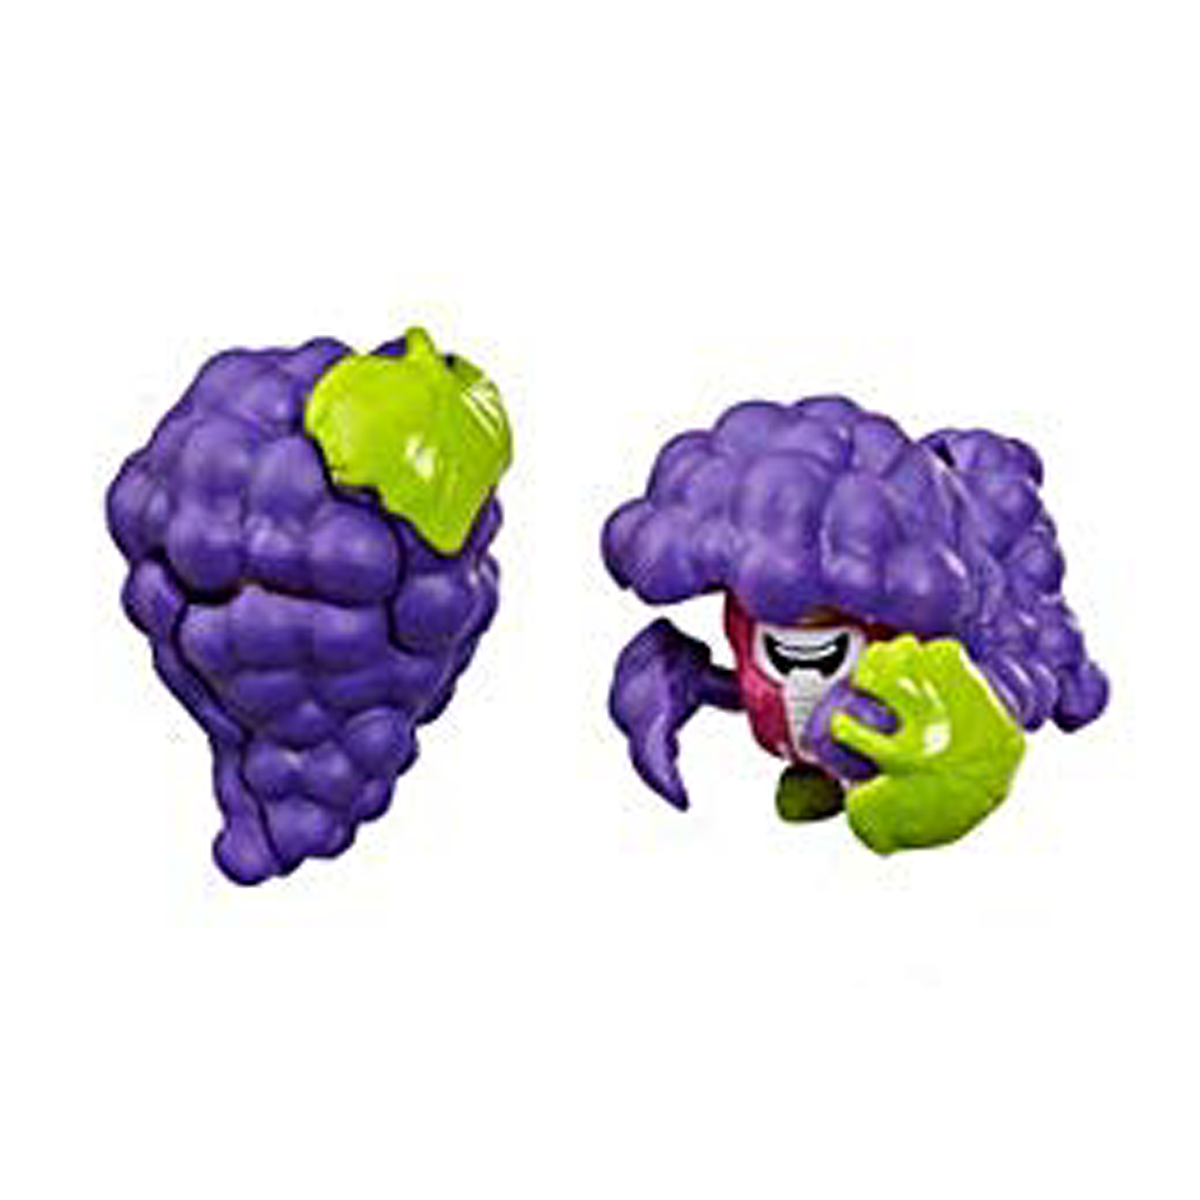 BUNCHES Transformers BotBots Series 3 Fresh Squeezes grapes 2019